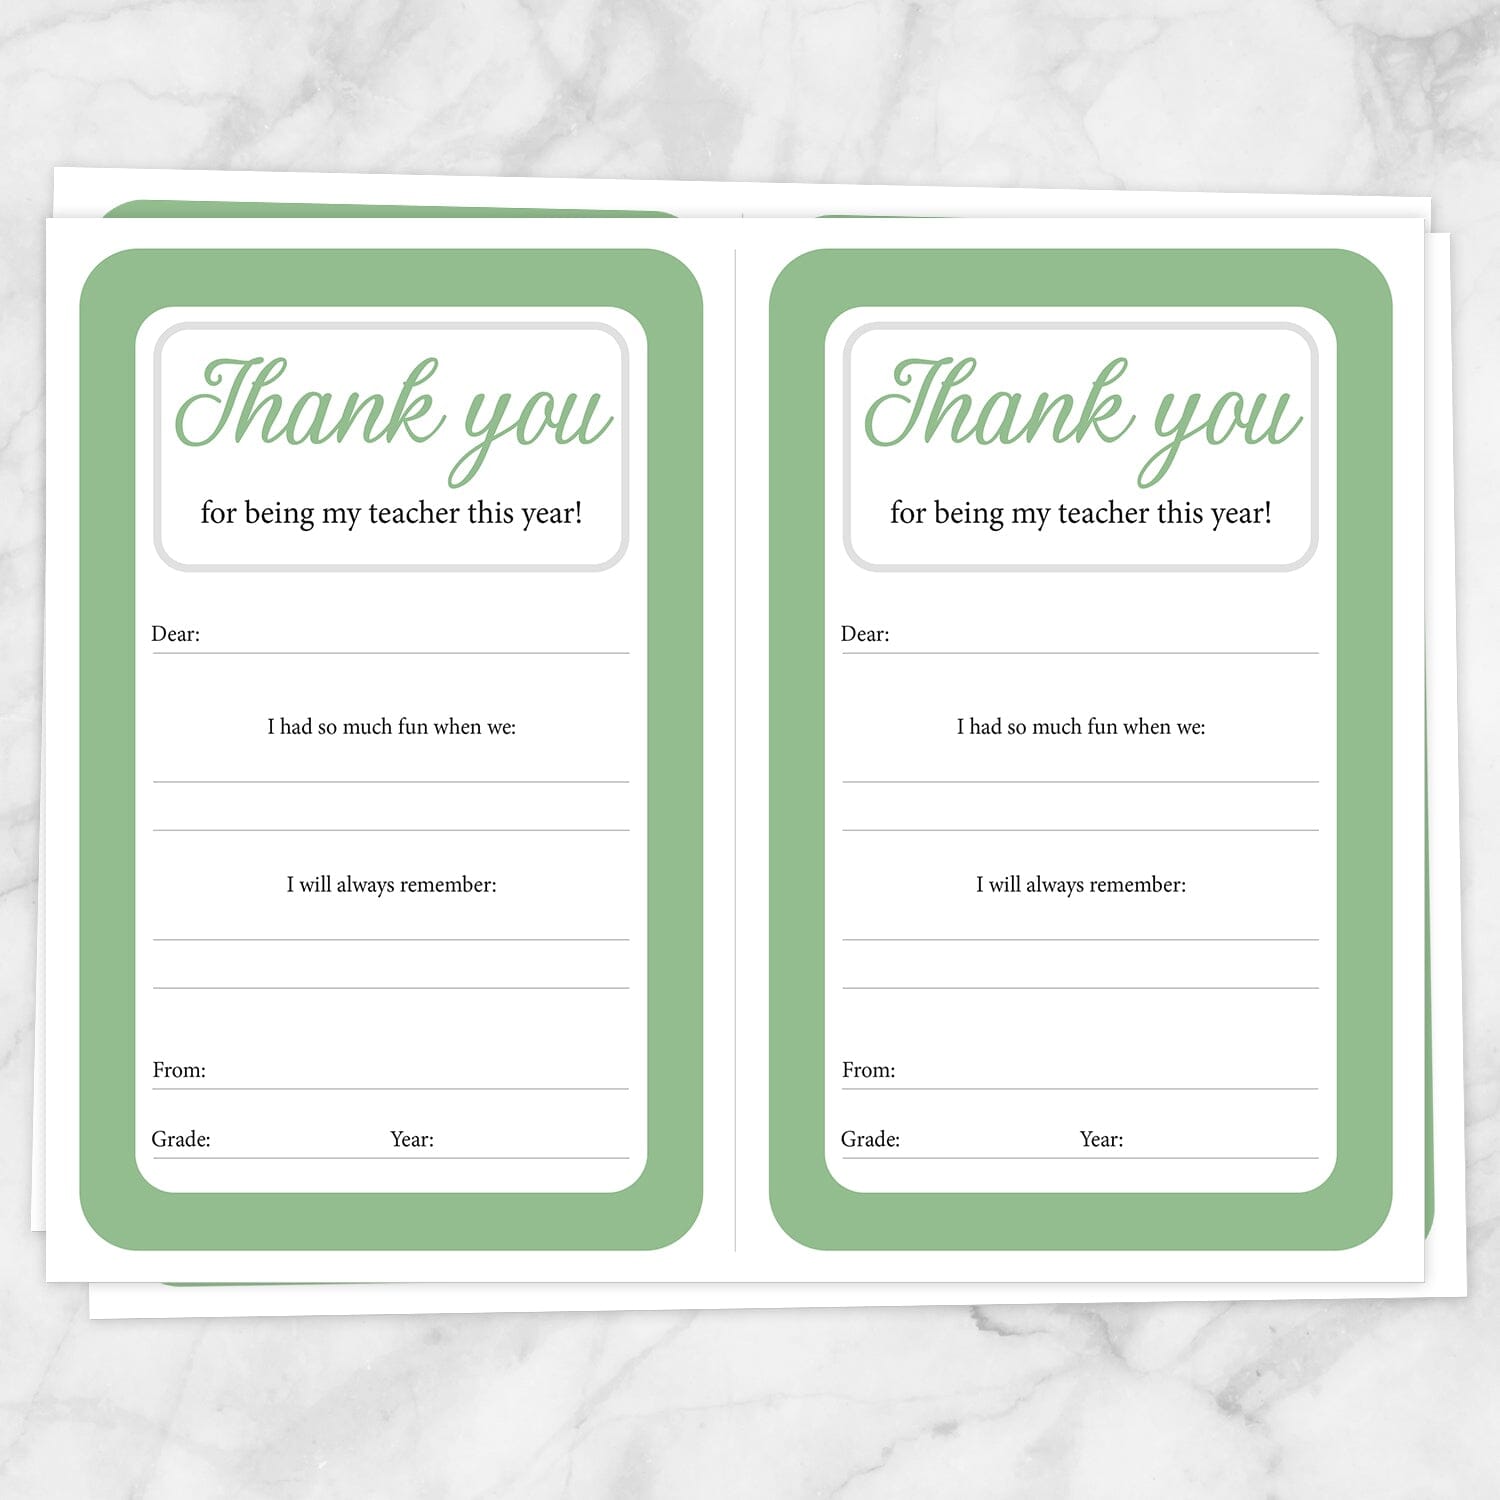 Printable Teacher Thank You Notes in green at Printable Planning. Sheets of 2 thank you notes per page.